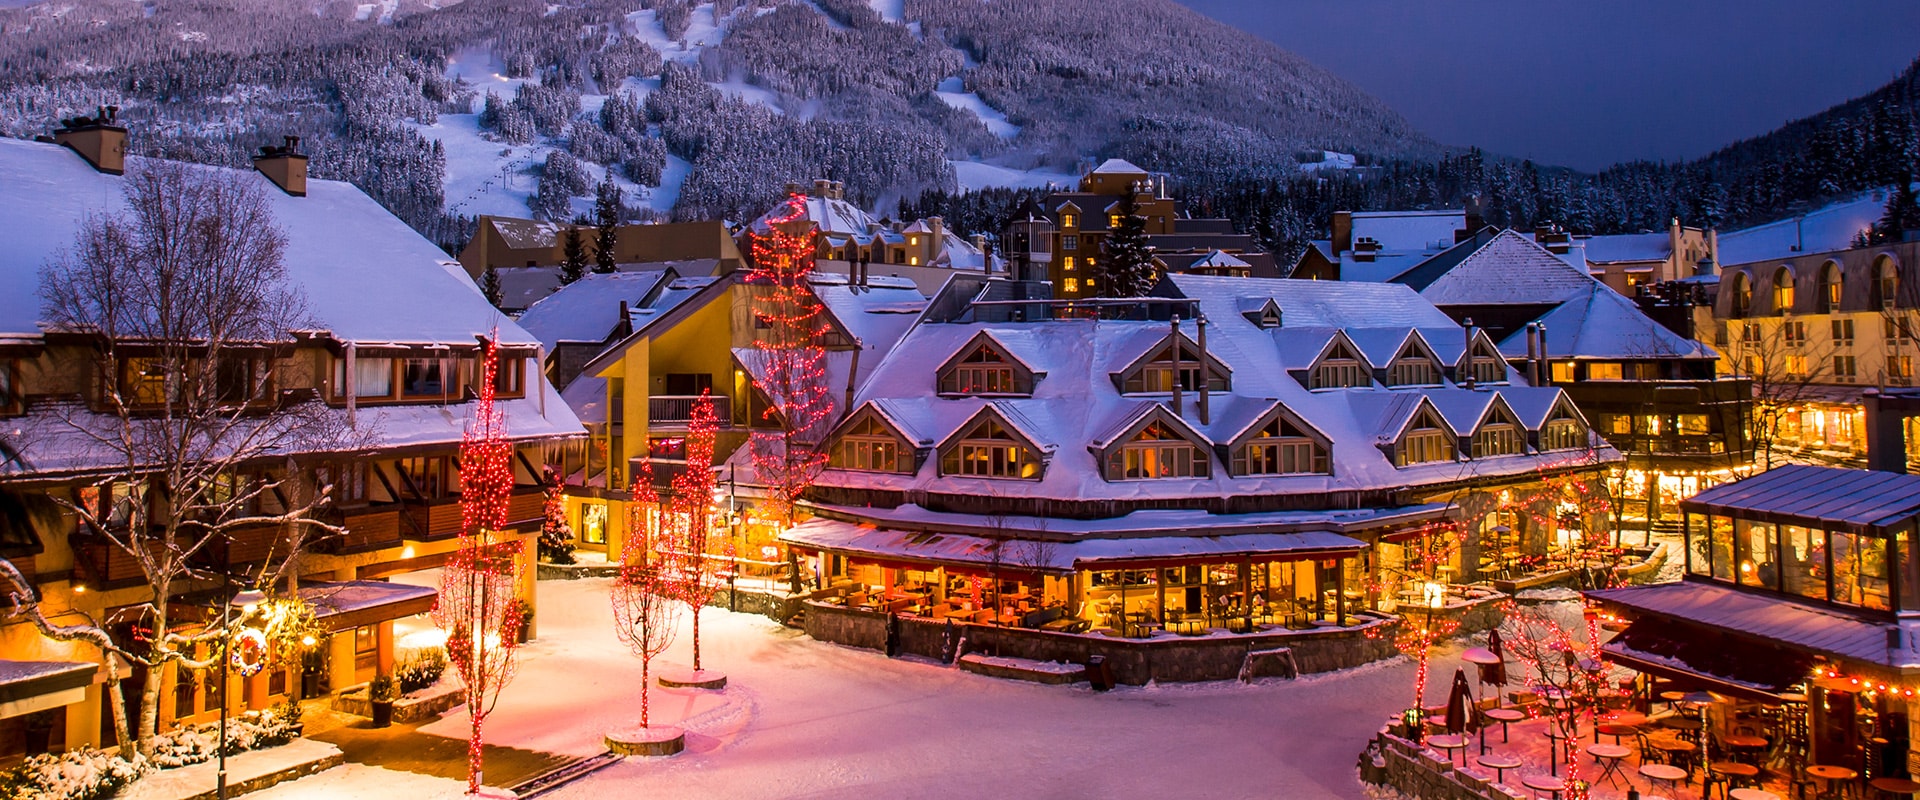 Whistler mountain center at night with colourful lighting